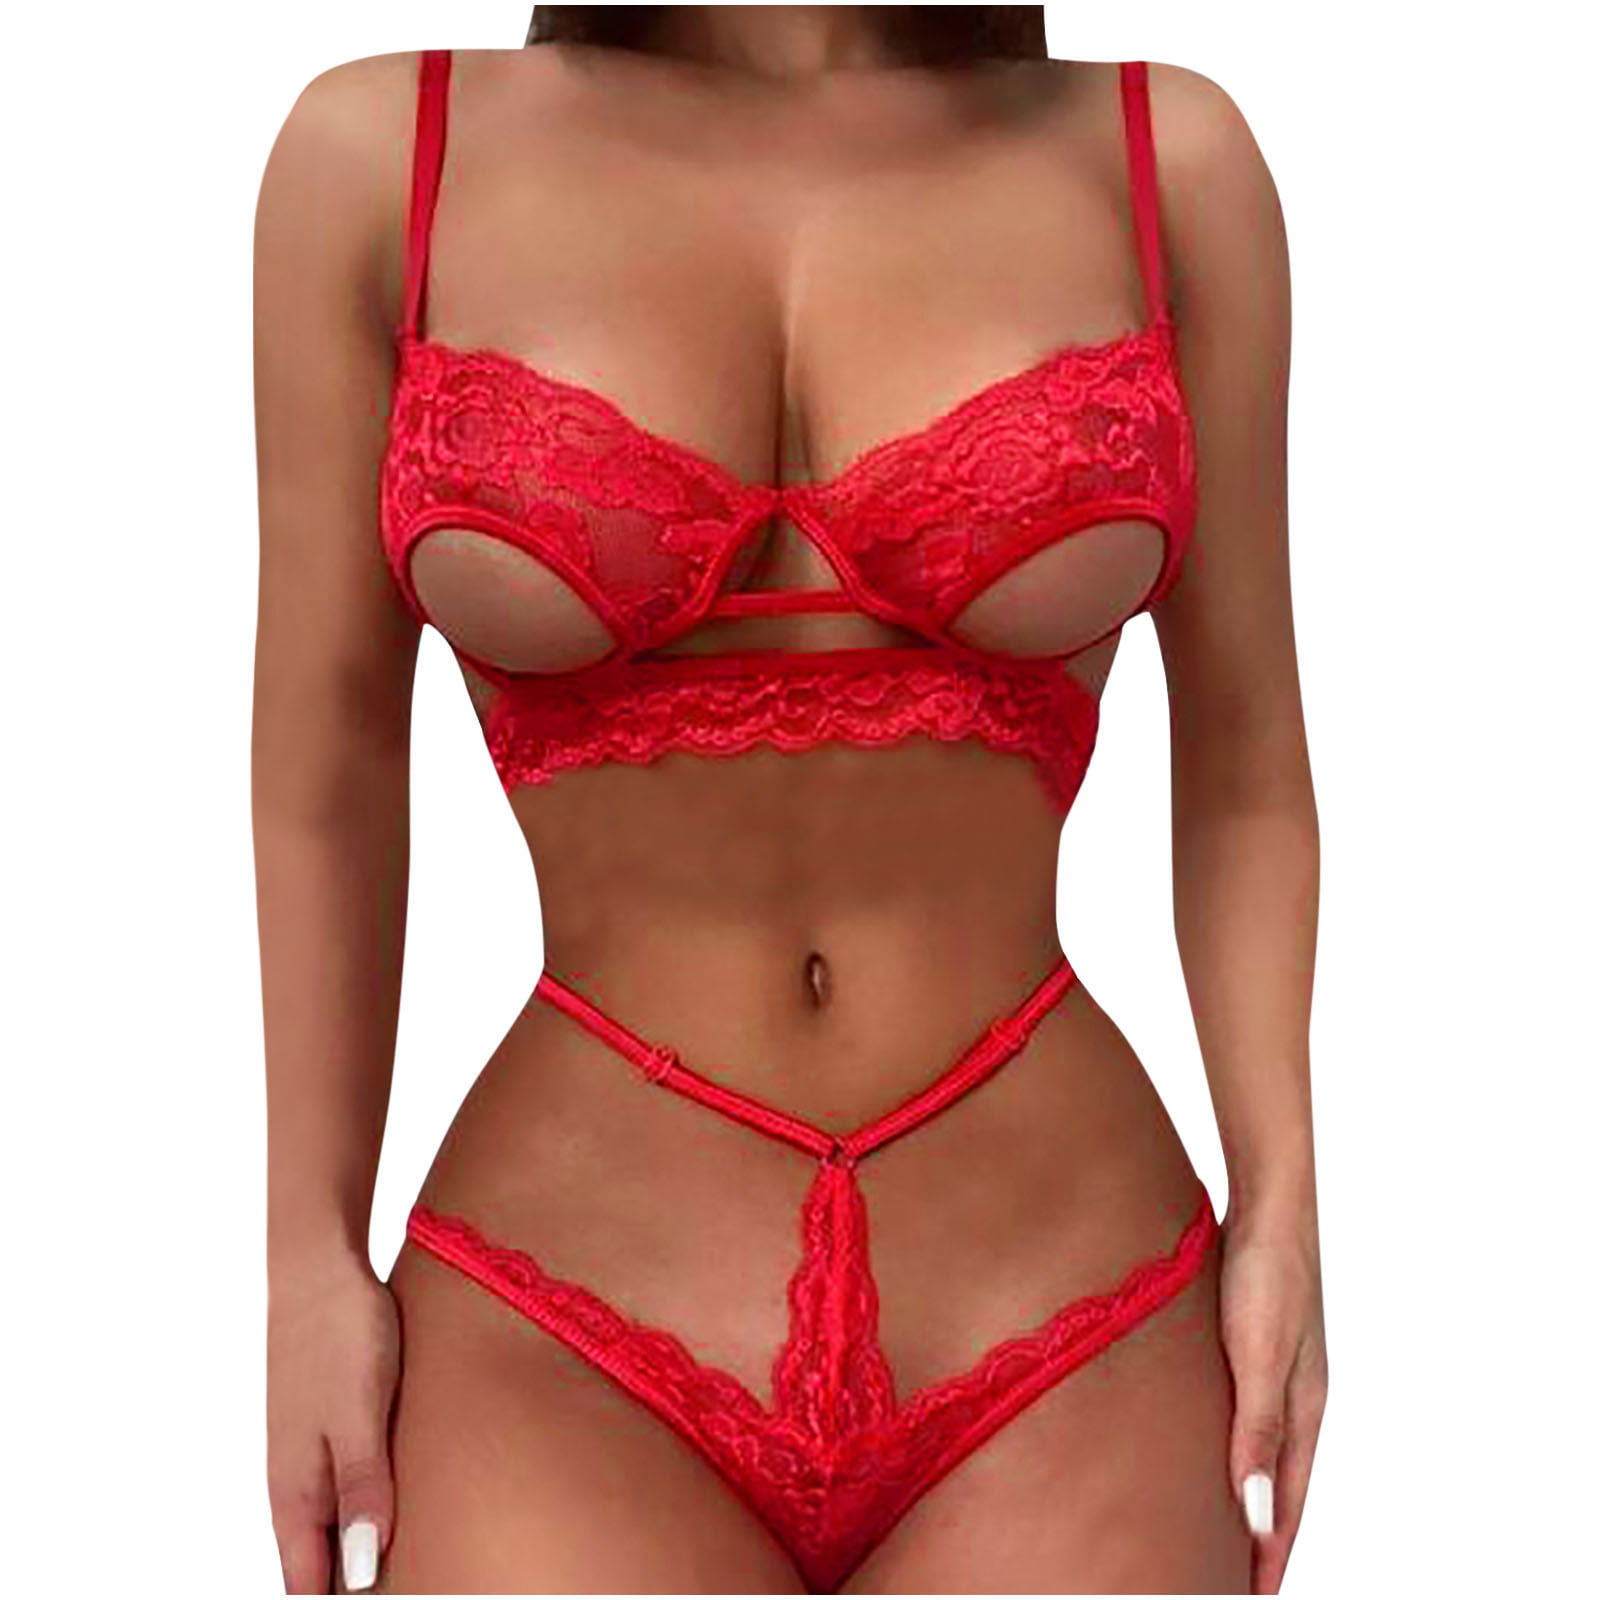 IROINNID Sexy Lingerie Set For Women V-Neck High-Cut Solid Color Sling Sexy Lingerie Hollow Out Two Piece Suit Sexy Lingerie Adult Pic Hq